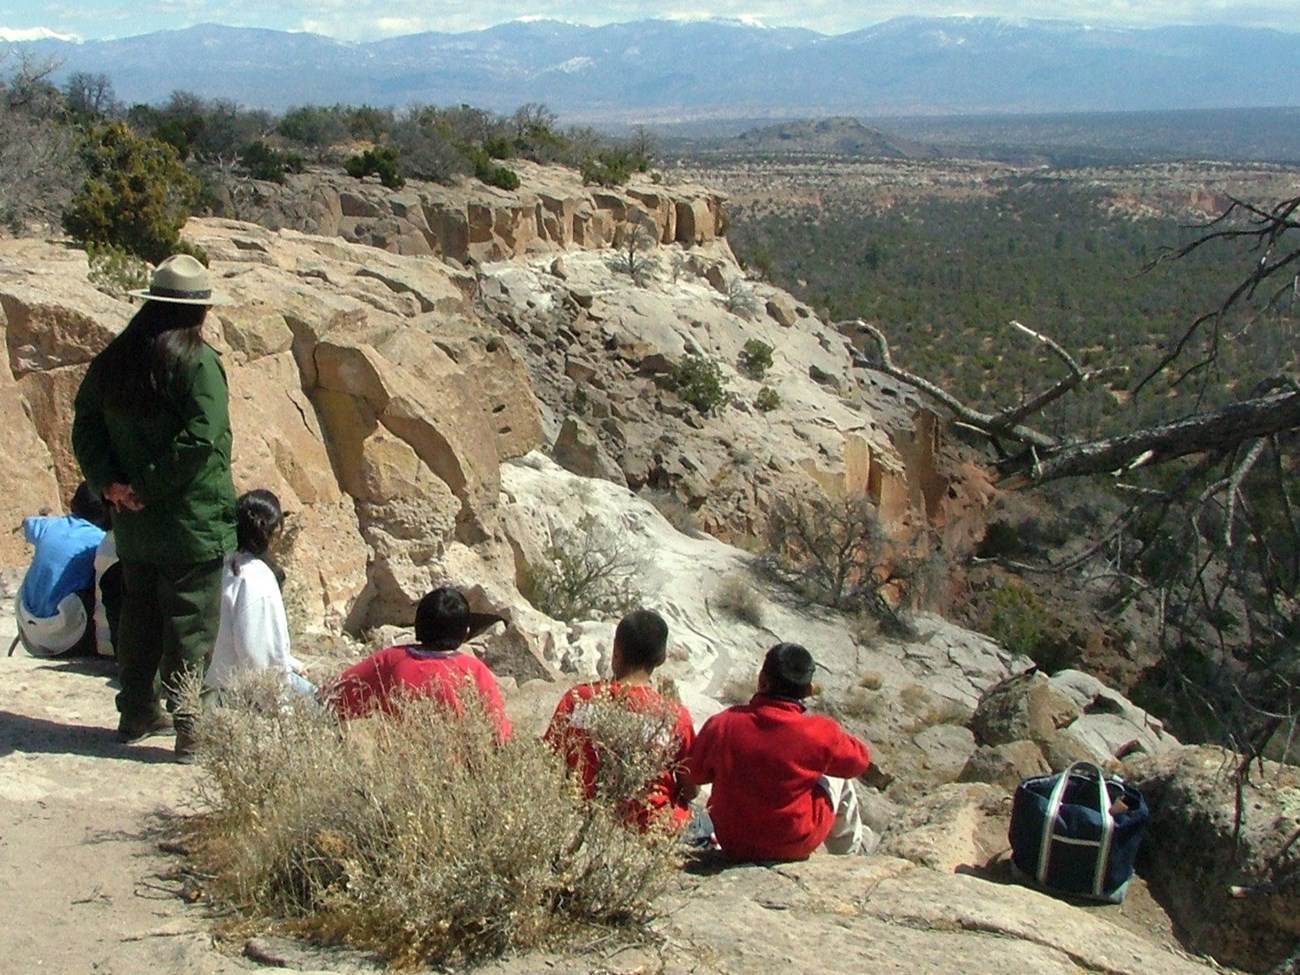 A park ranger and a group of children look out into the distance over a rocky landscape.